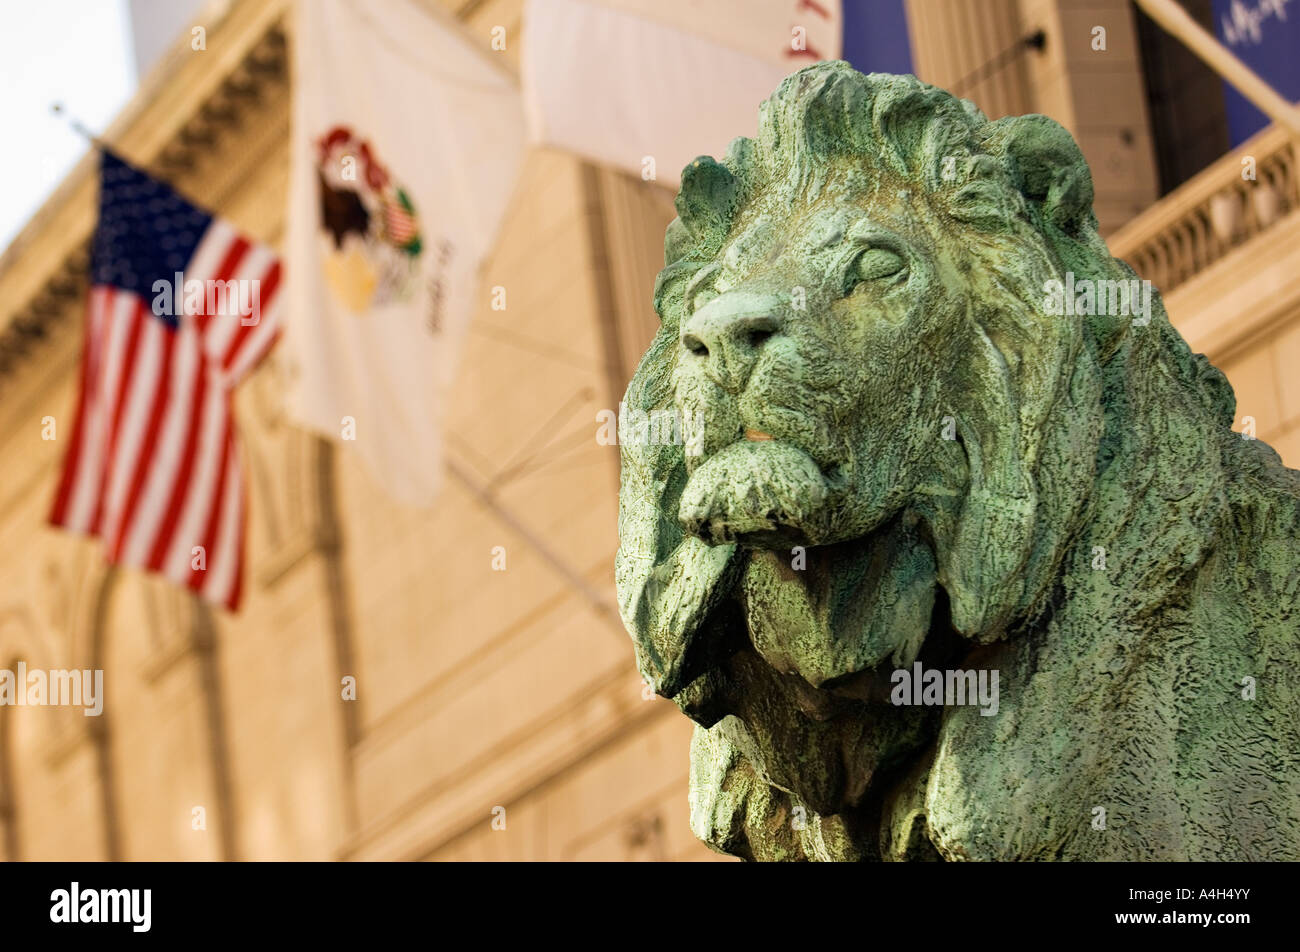 The bronze lion statue at the entrance of the Art Institute in Chicago Illinois Stock Photo